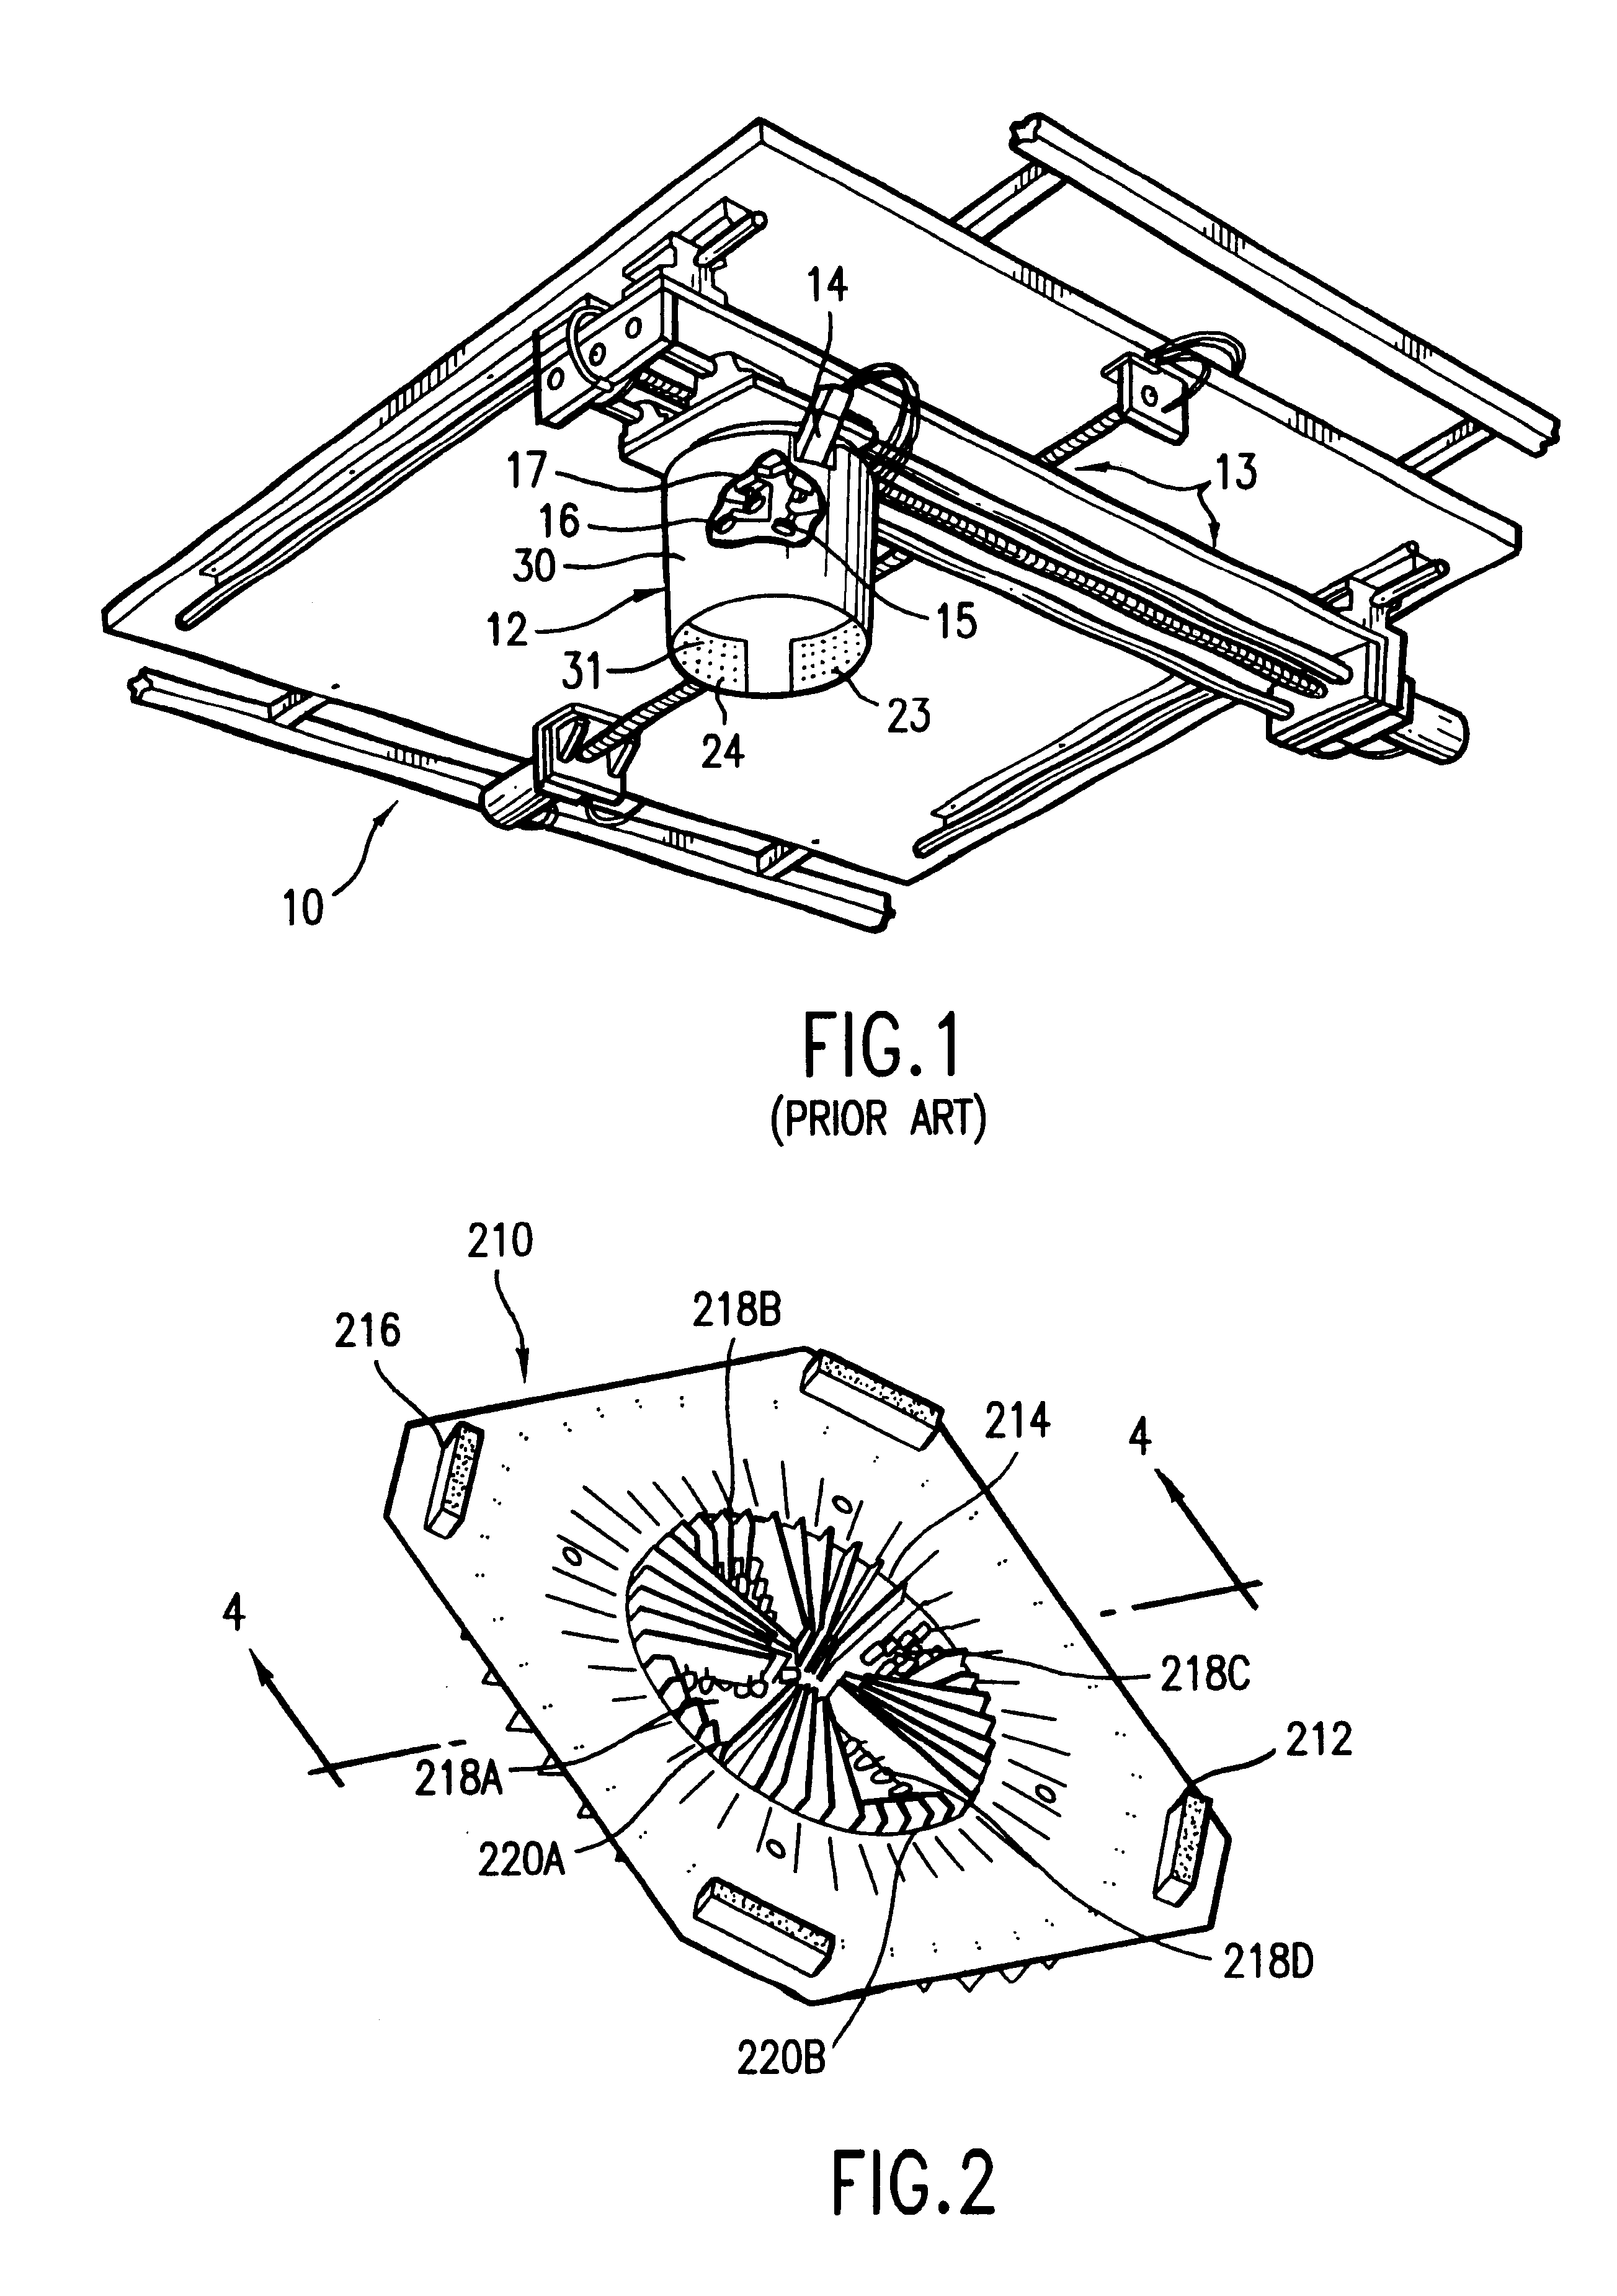 Lighting arrangement for automated optical inspection system